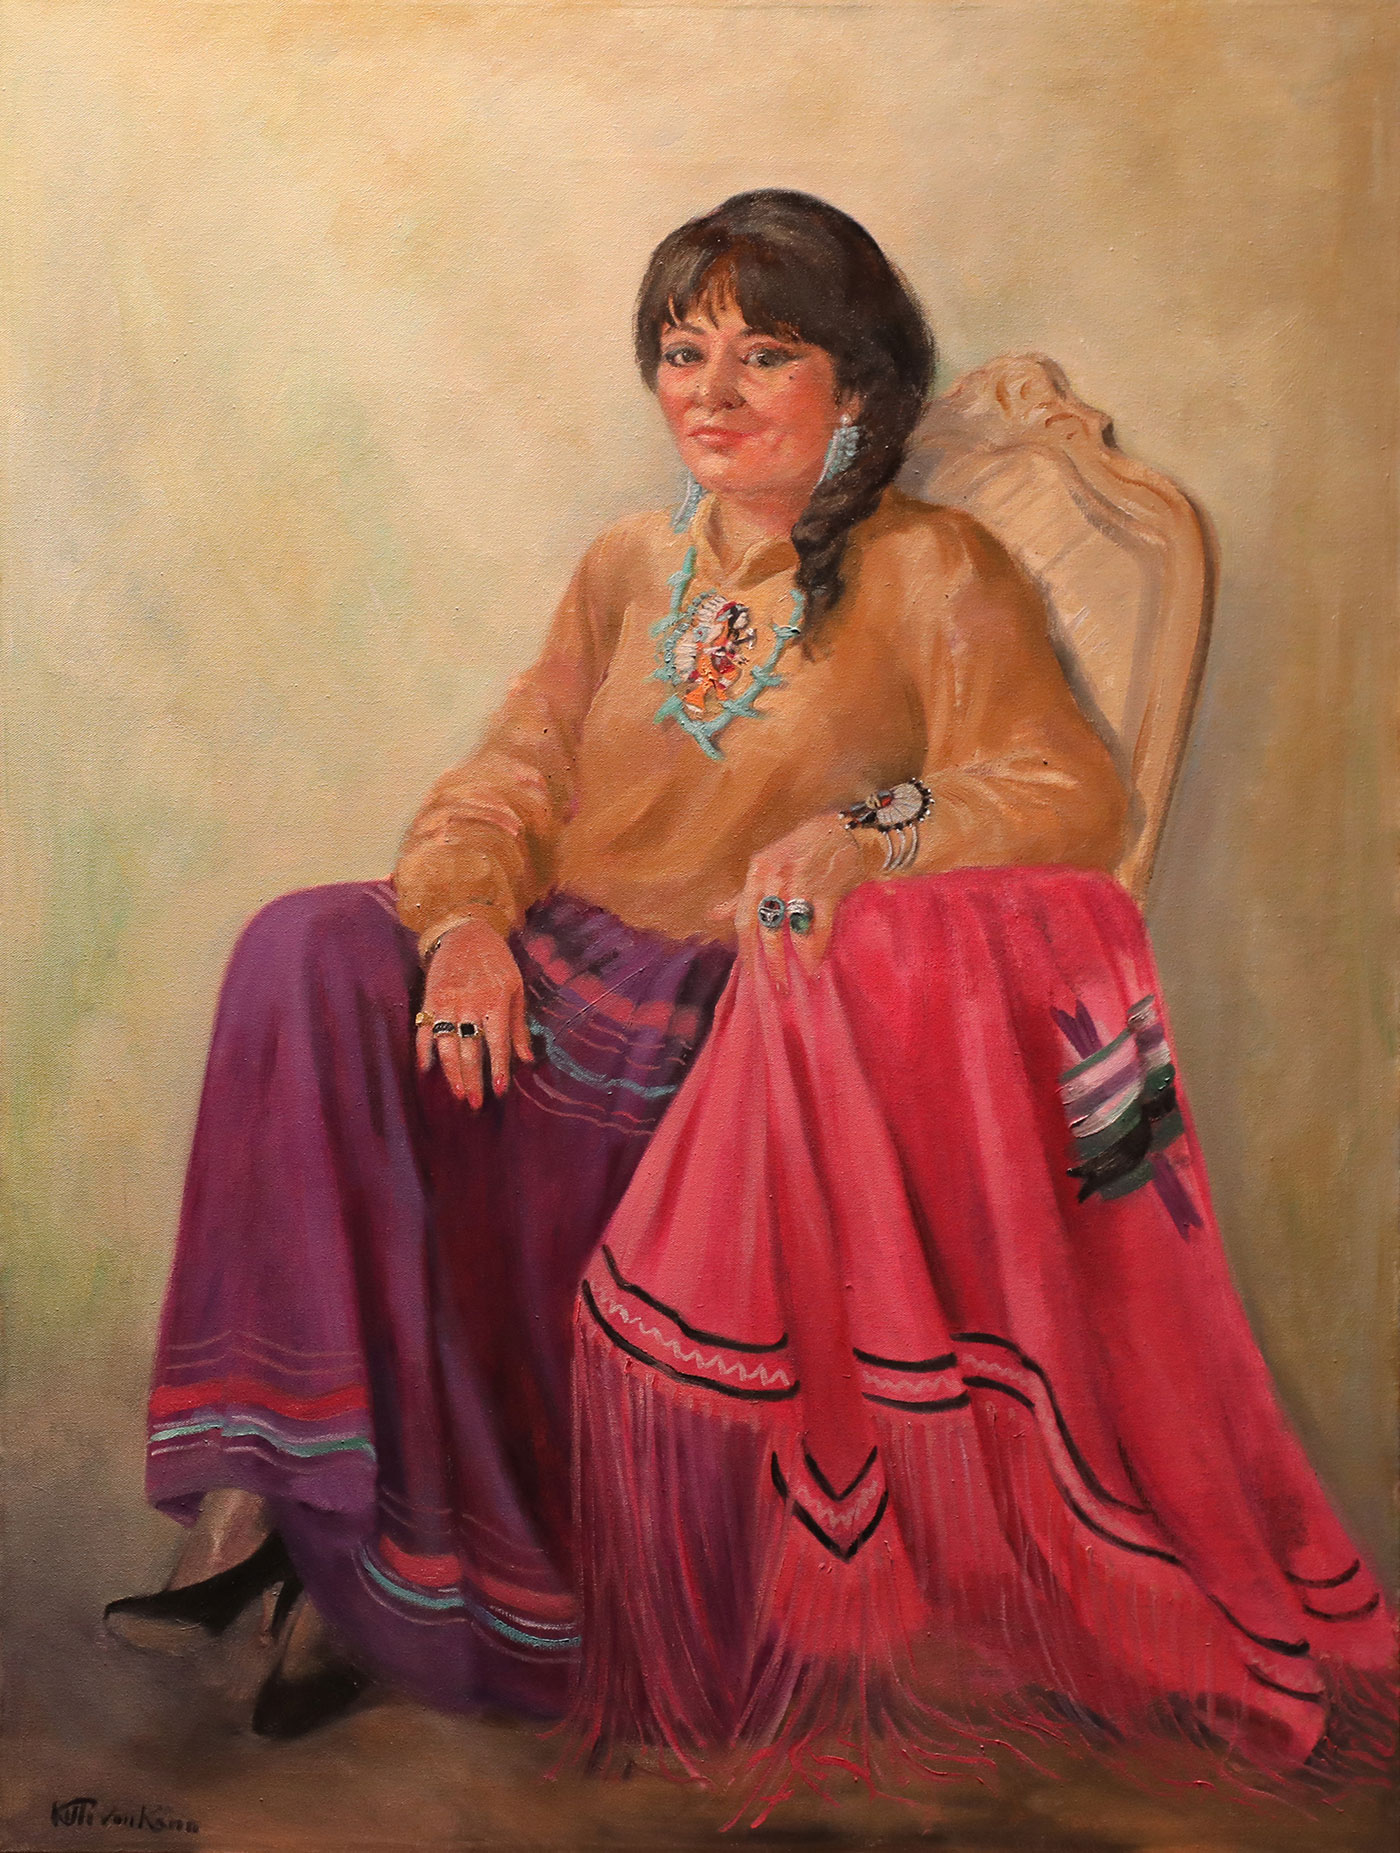 Painted full length seated portrait of Thomasina E. Jordan. Subject is sitting in an ornate armchair on a graduated background of yellows, browns, purples, and greens. Jordan wears Native-inspired clothing consisting of a tan/yellow long sleeve, collared shirt with a native dancing figure below the center of the collar, and a purple skirt with light purple, pink and blue horizontal stripes around the waist and hem. Subject is also wearing turquoise earrings and necklace, three rings on her proper right hand, two on her proper left hand, as well as a bracelet/cuff on her proper left wrist. A pink woven blanket with a long fringe is draped across the arm of the proper left arm of the chair facing the viewer. Blanket has a purple, teal, black, and white design at the center and a black and white border around the edge of the blanket.